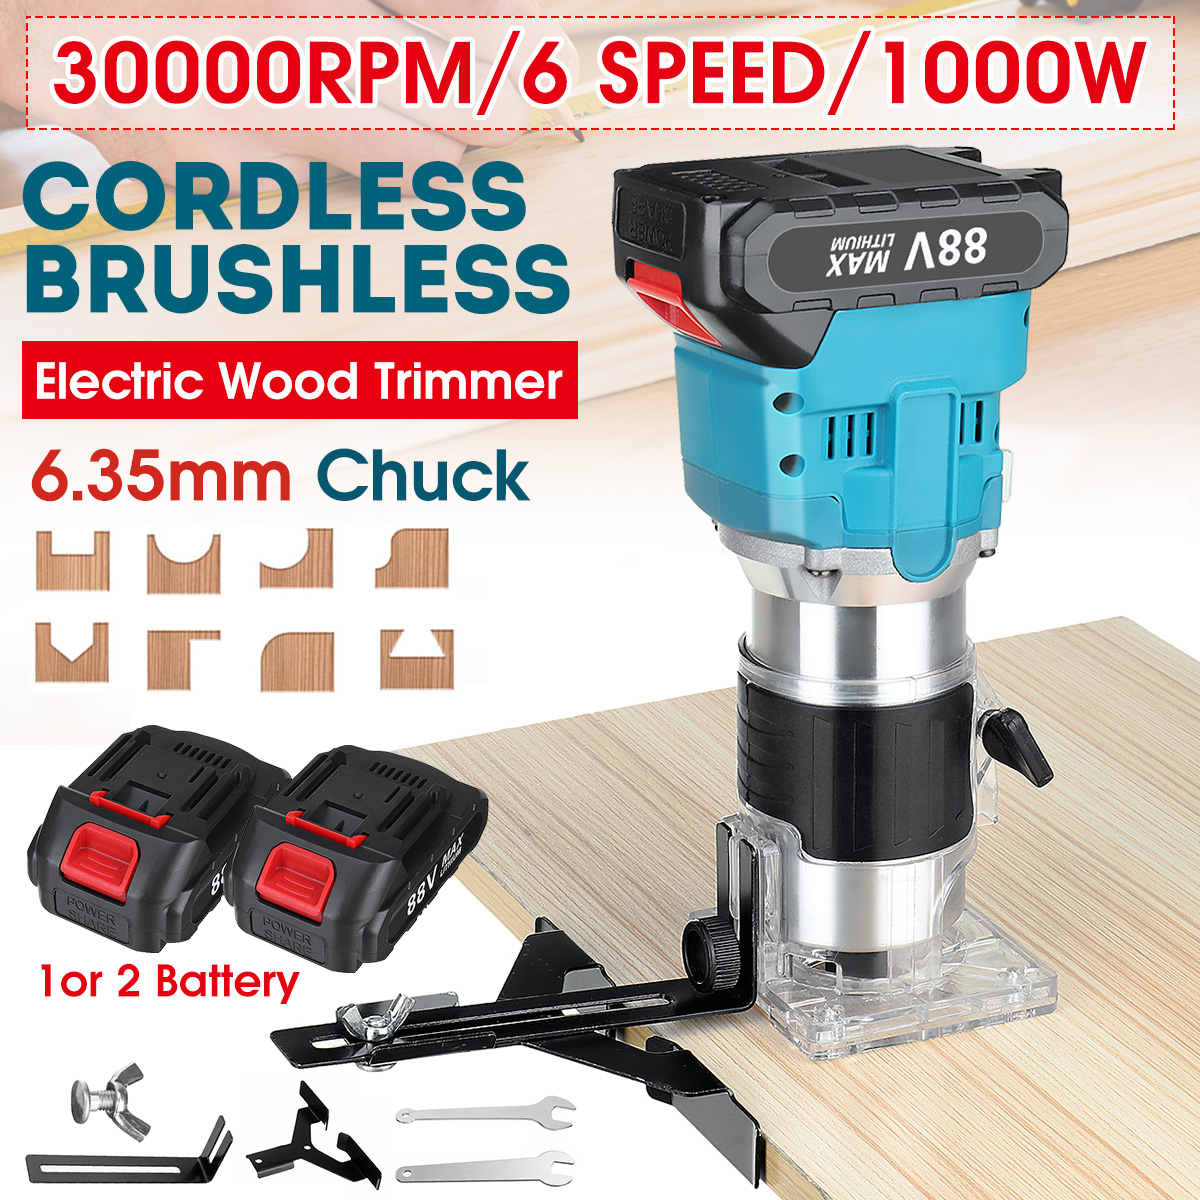 30000rpm-1000W-Cordless-Brushless-Electric-Trimmer-6-Speeds-Wood-Trimmer-Router-W-12pcs-Battery-1856249-2